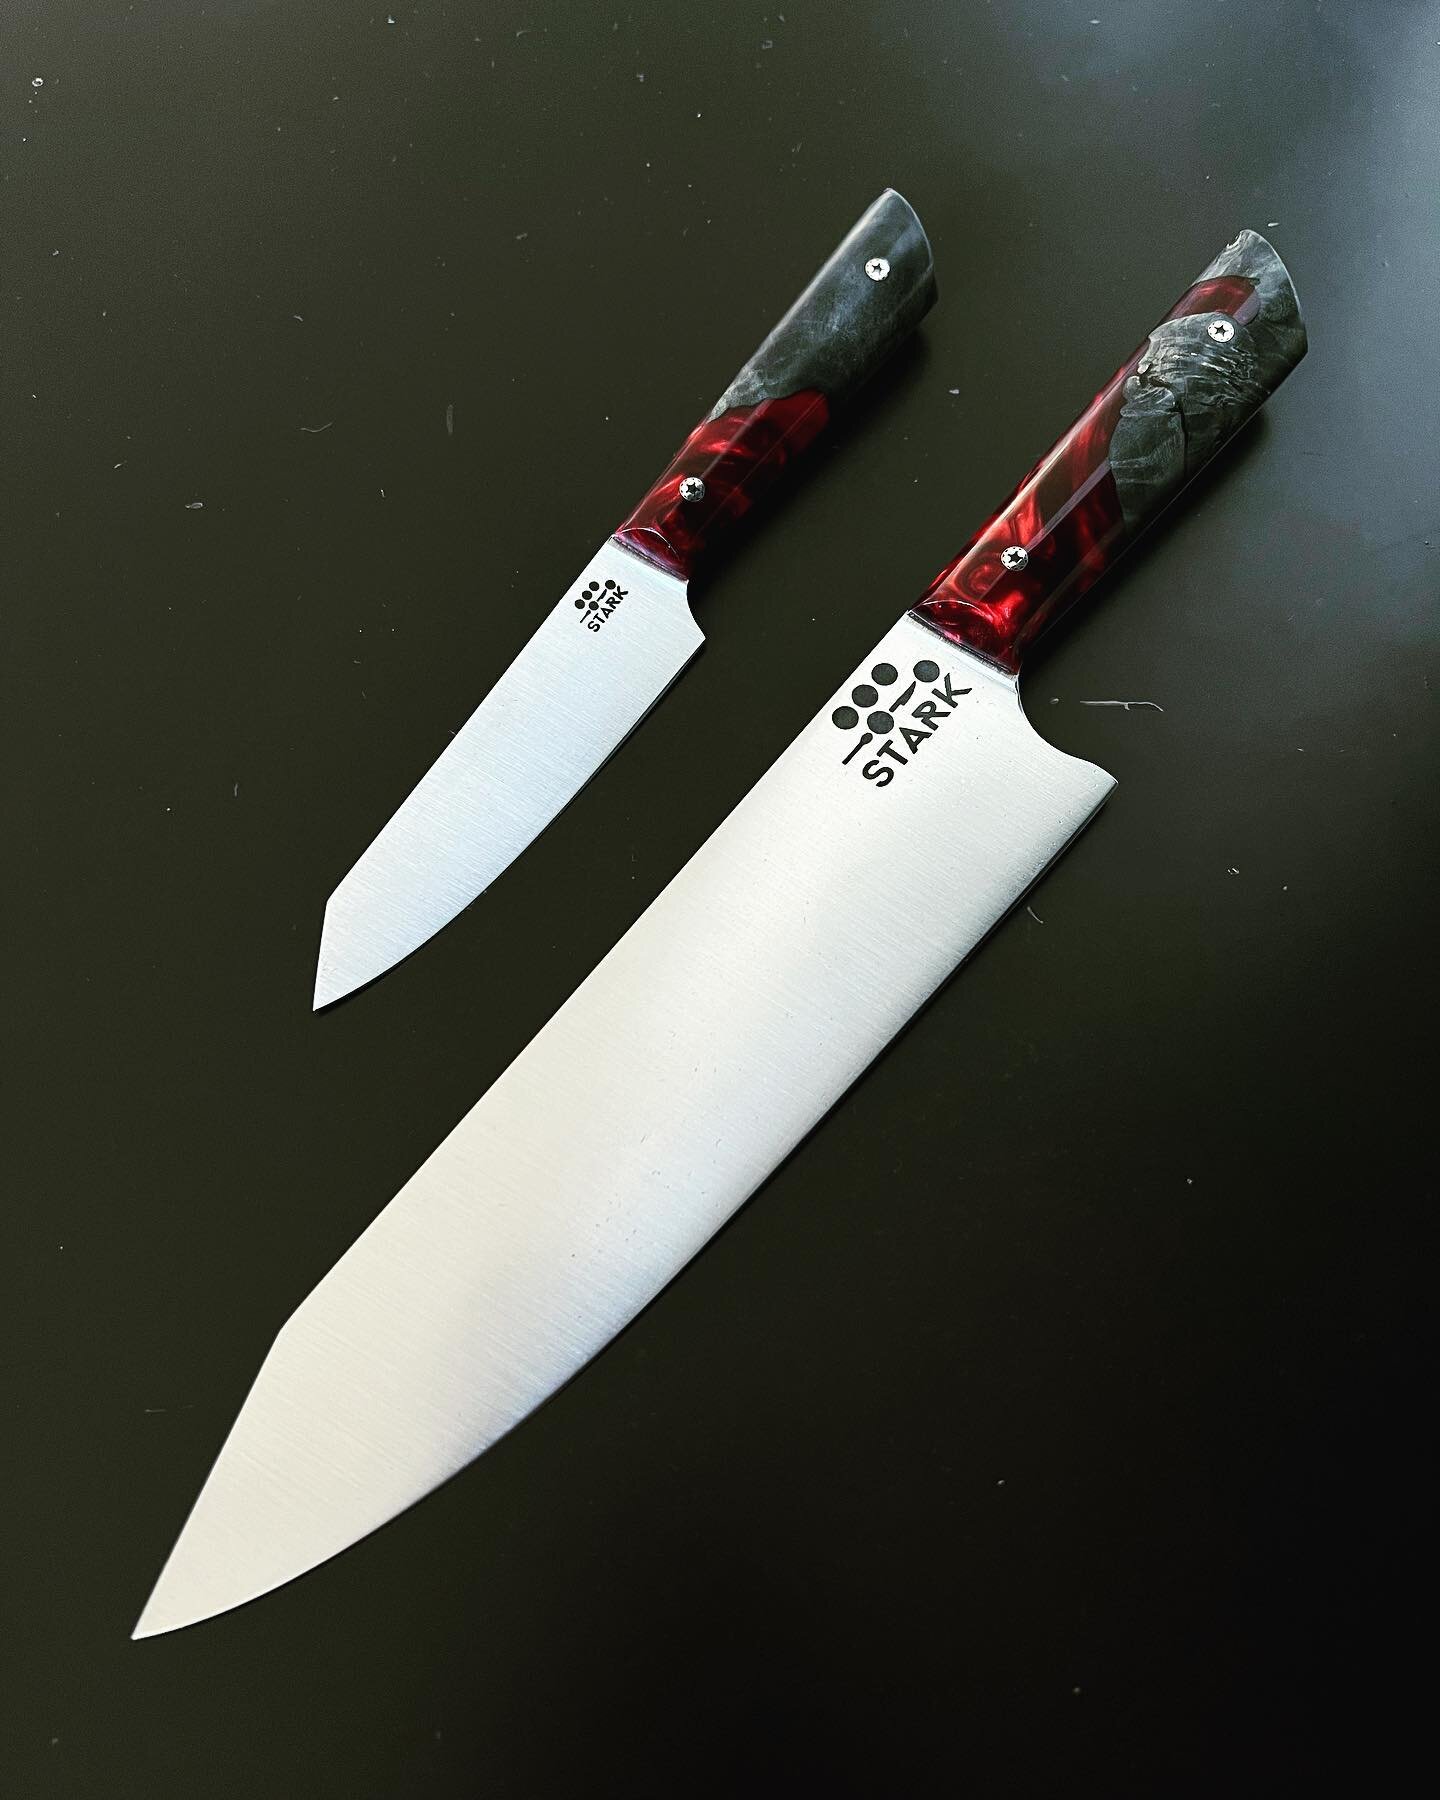 Any kitchen would benefit from having a reliable set like this! This custom order we just finished up consists of a paring knife and chef&rsquo;s knife, with matching ruby resin and dark dyed burl handles. A stunning pair!
&mdash;&mdash;&mdash;&mdash